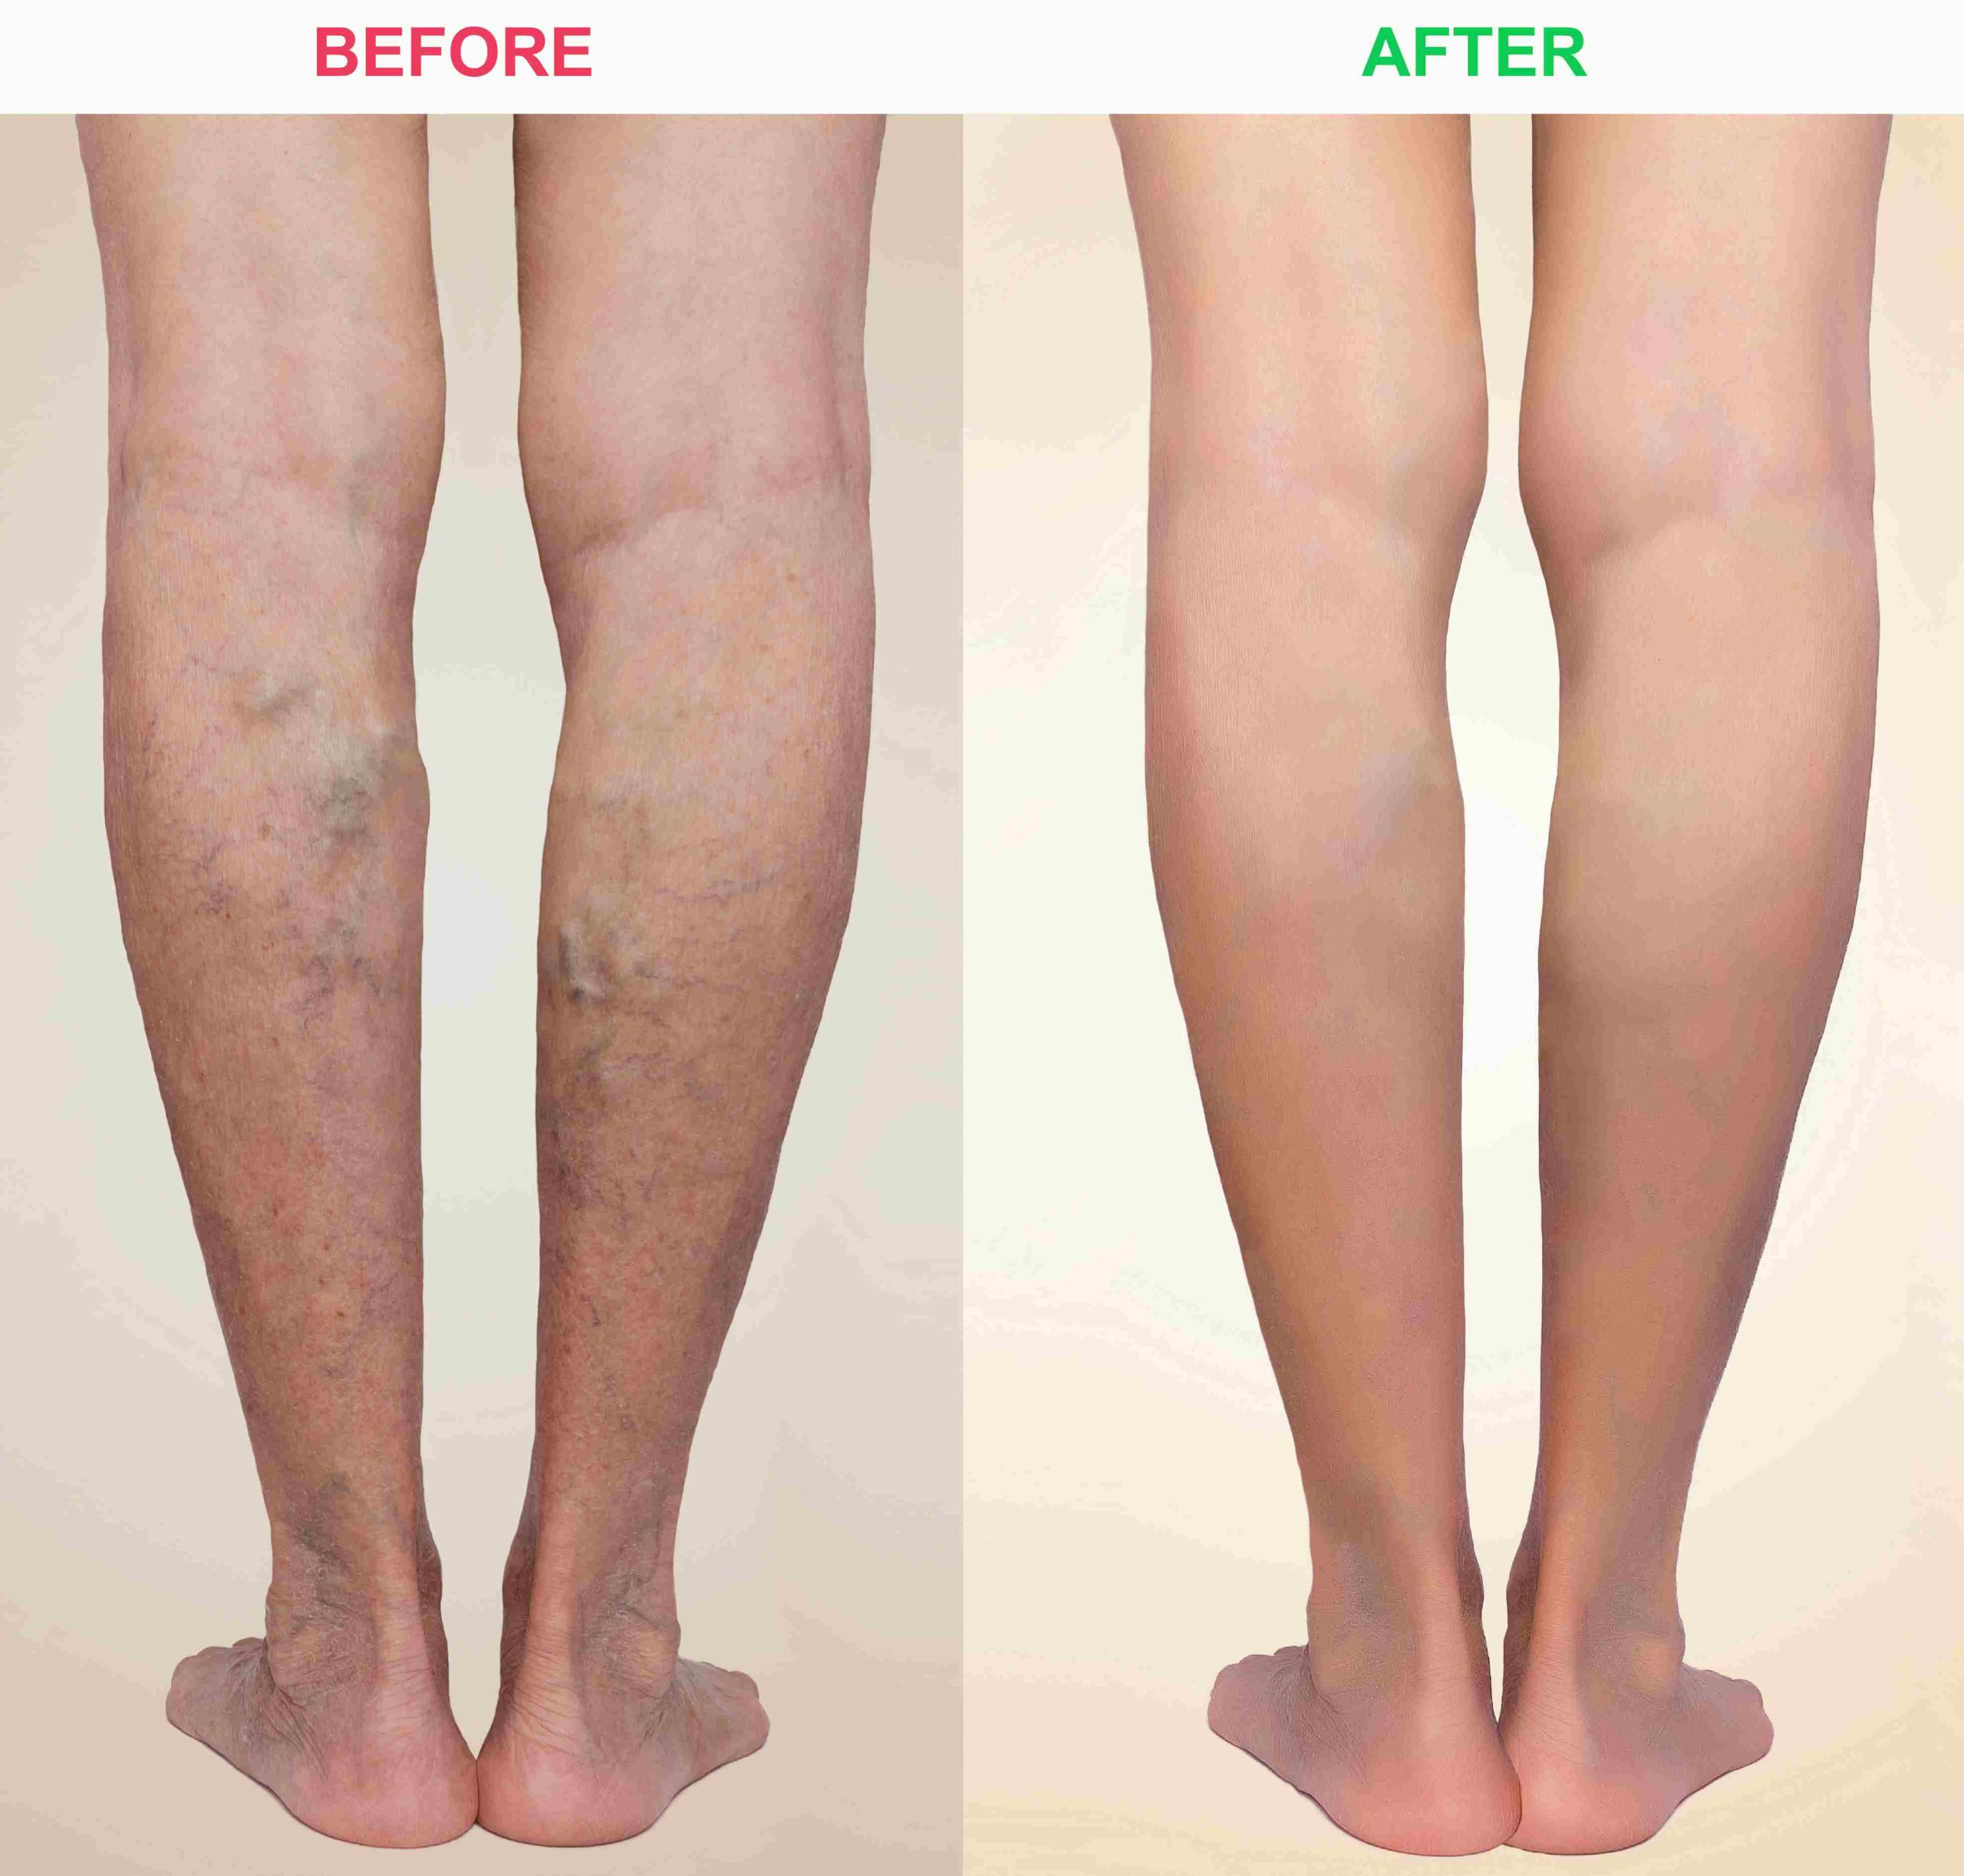 Laser Vein Removal Before and After Photos | Avail Aesthetics in Raleigh, NC